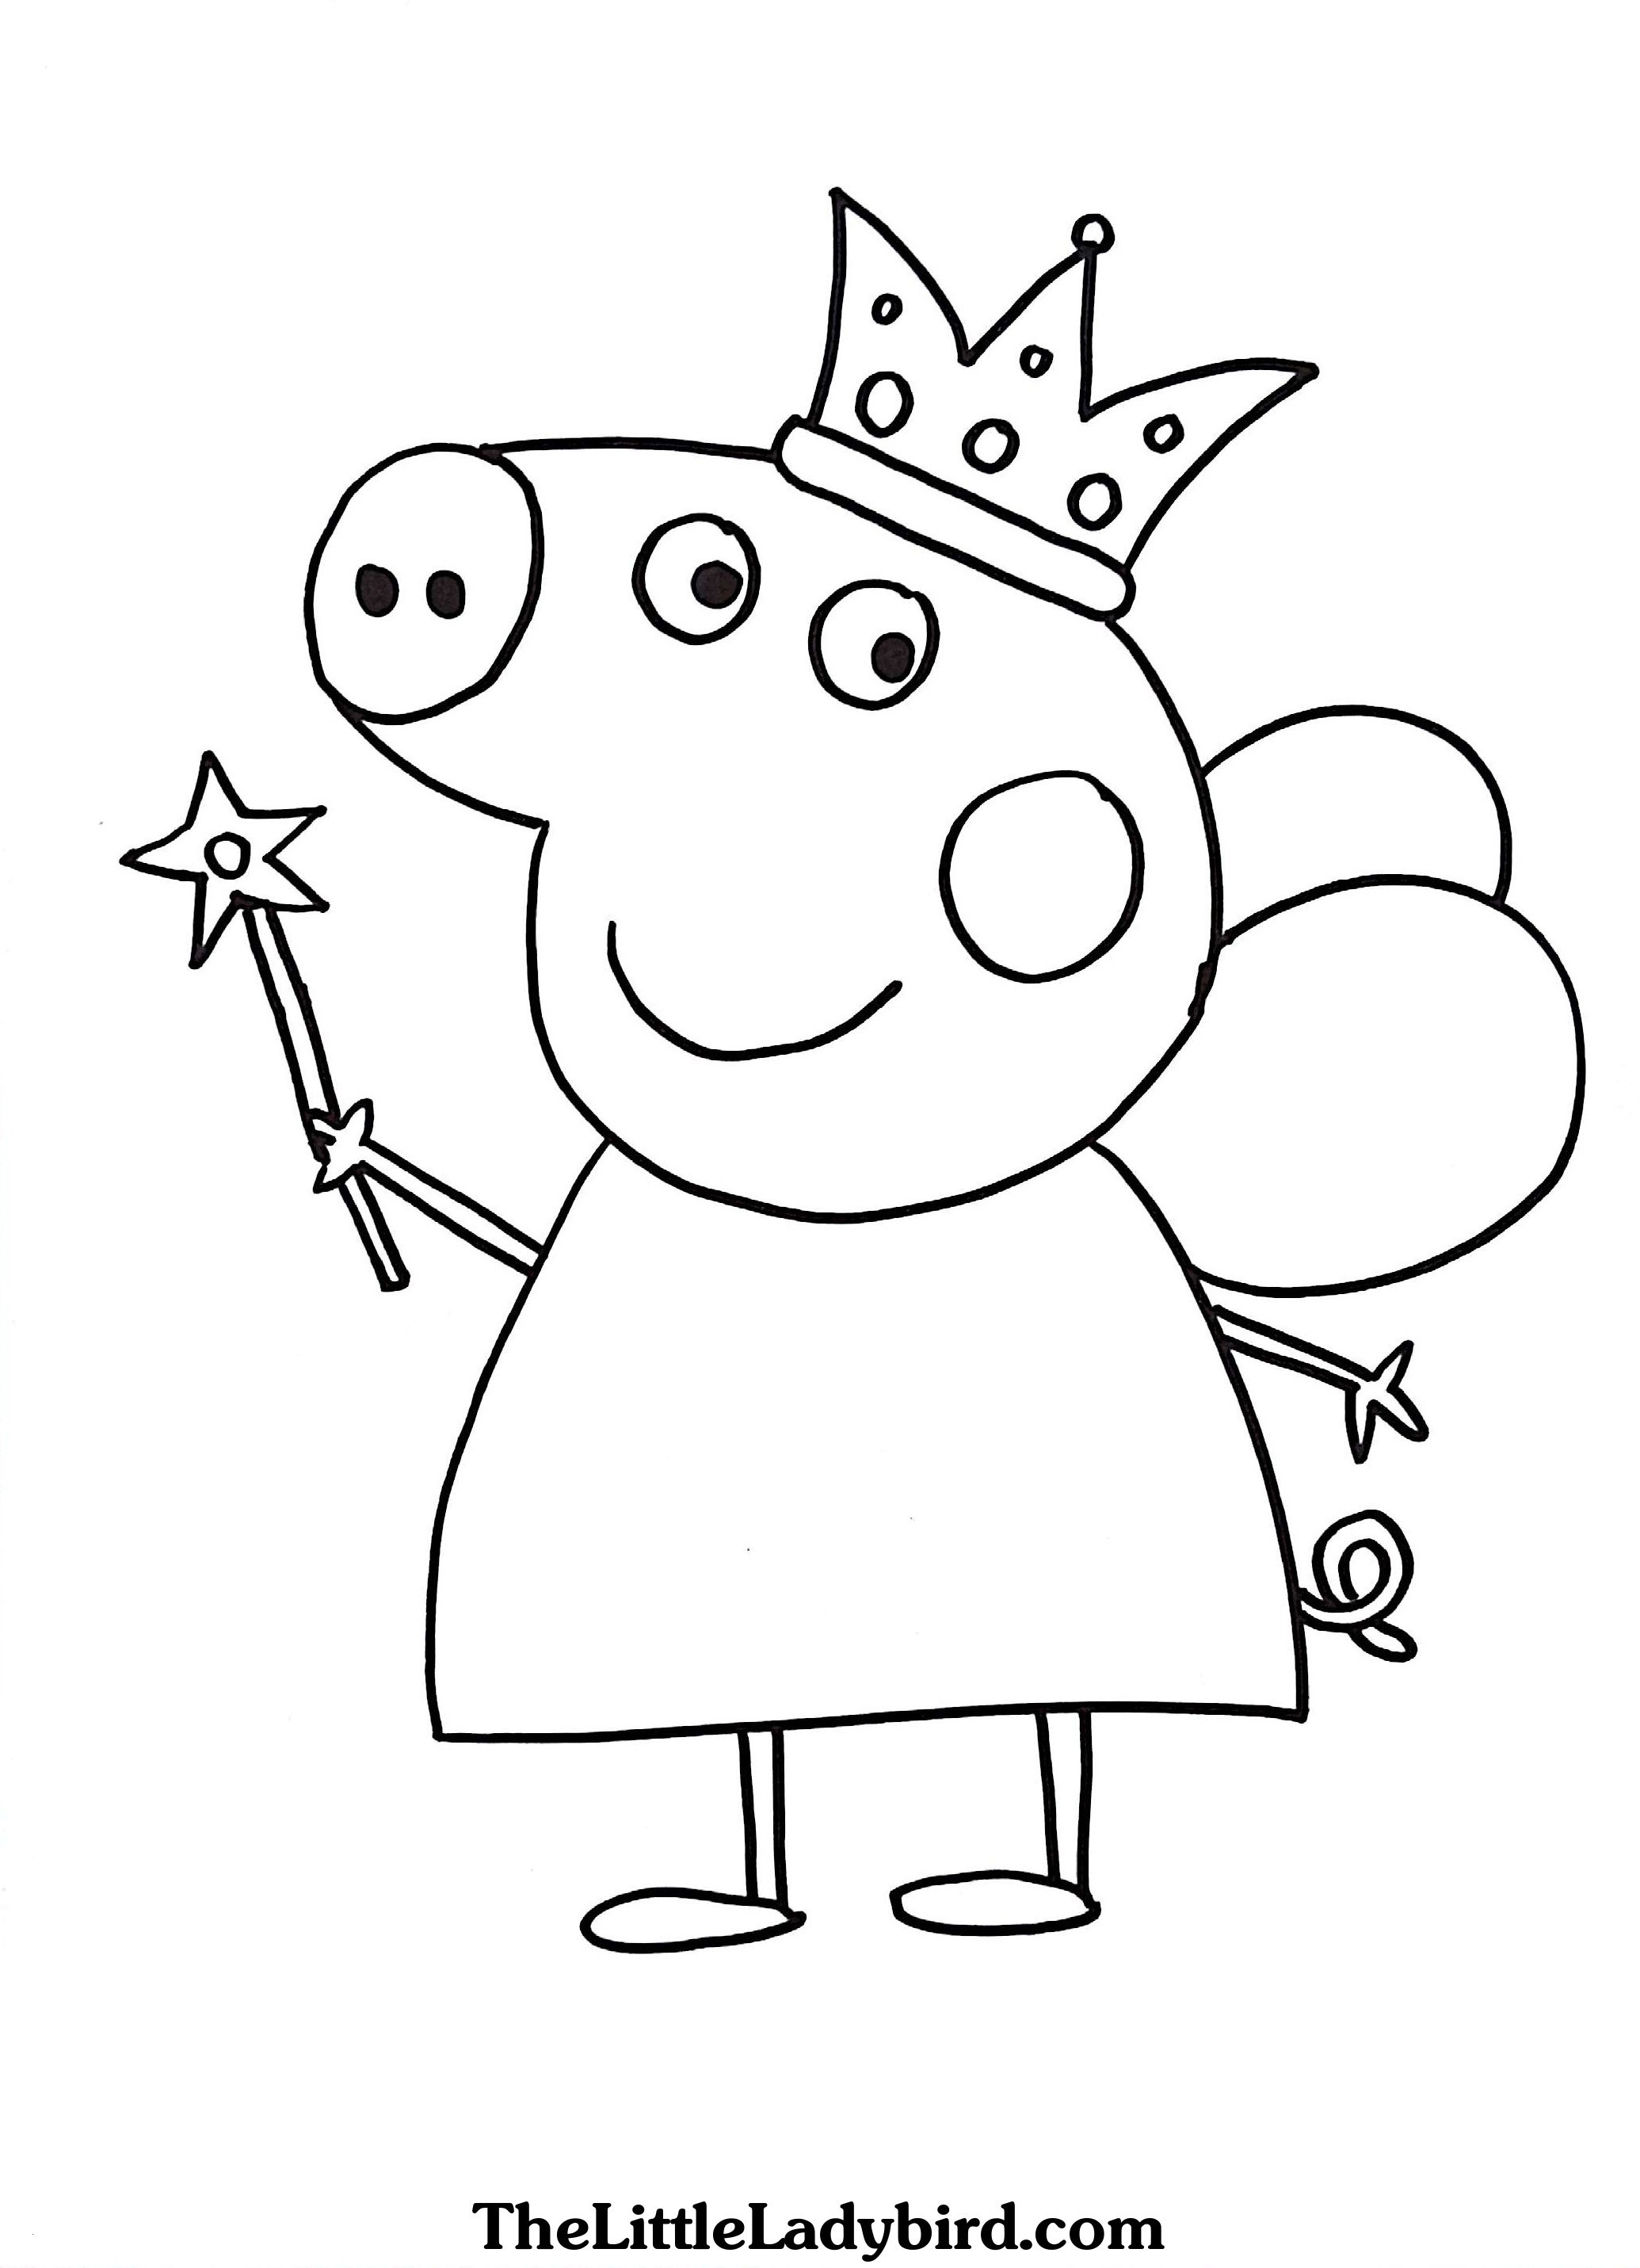 Guinea Pig Coloring Page Inspirational Guinea Pig Coloring Page Unique Peppa Pig Coloring Pages Free Free